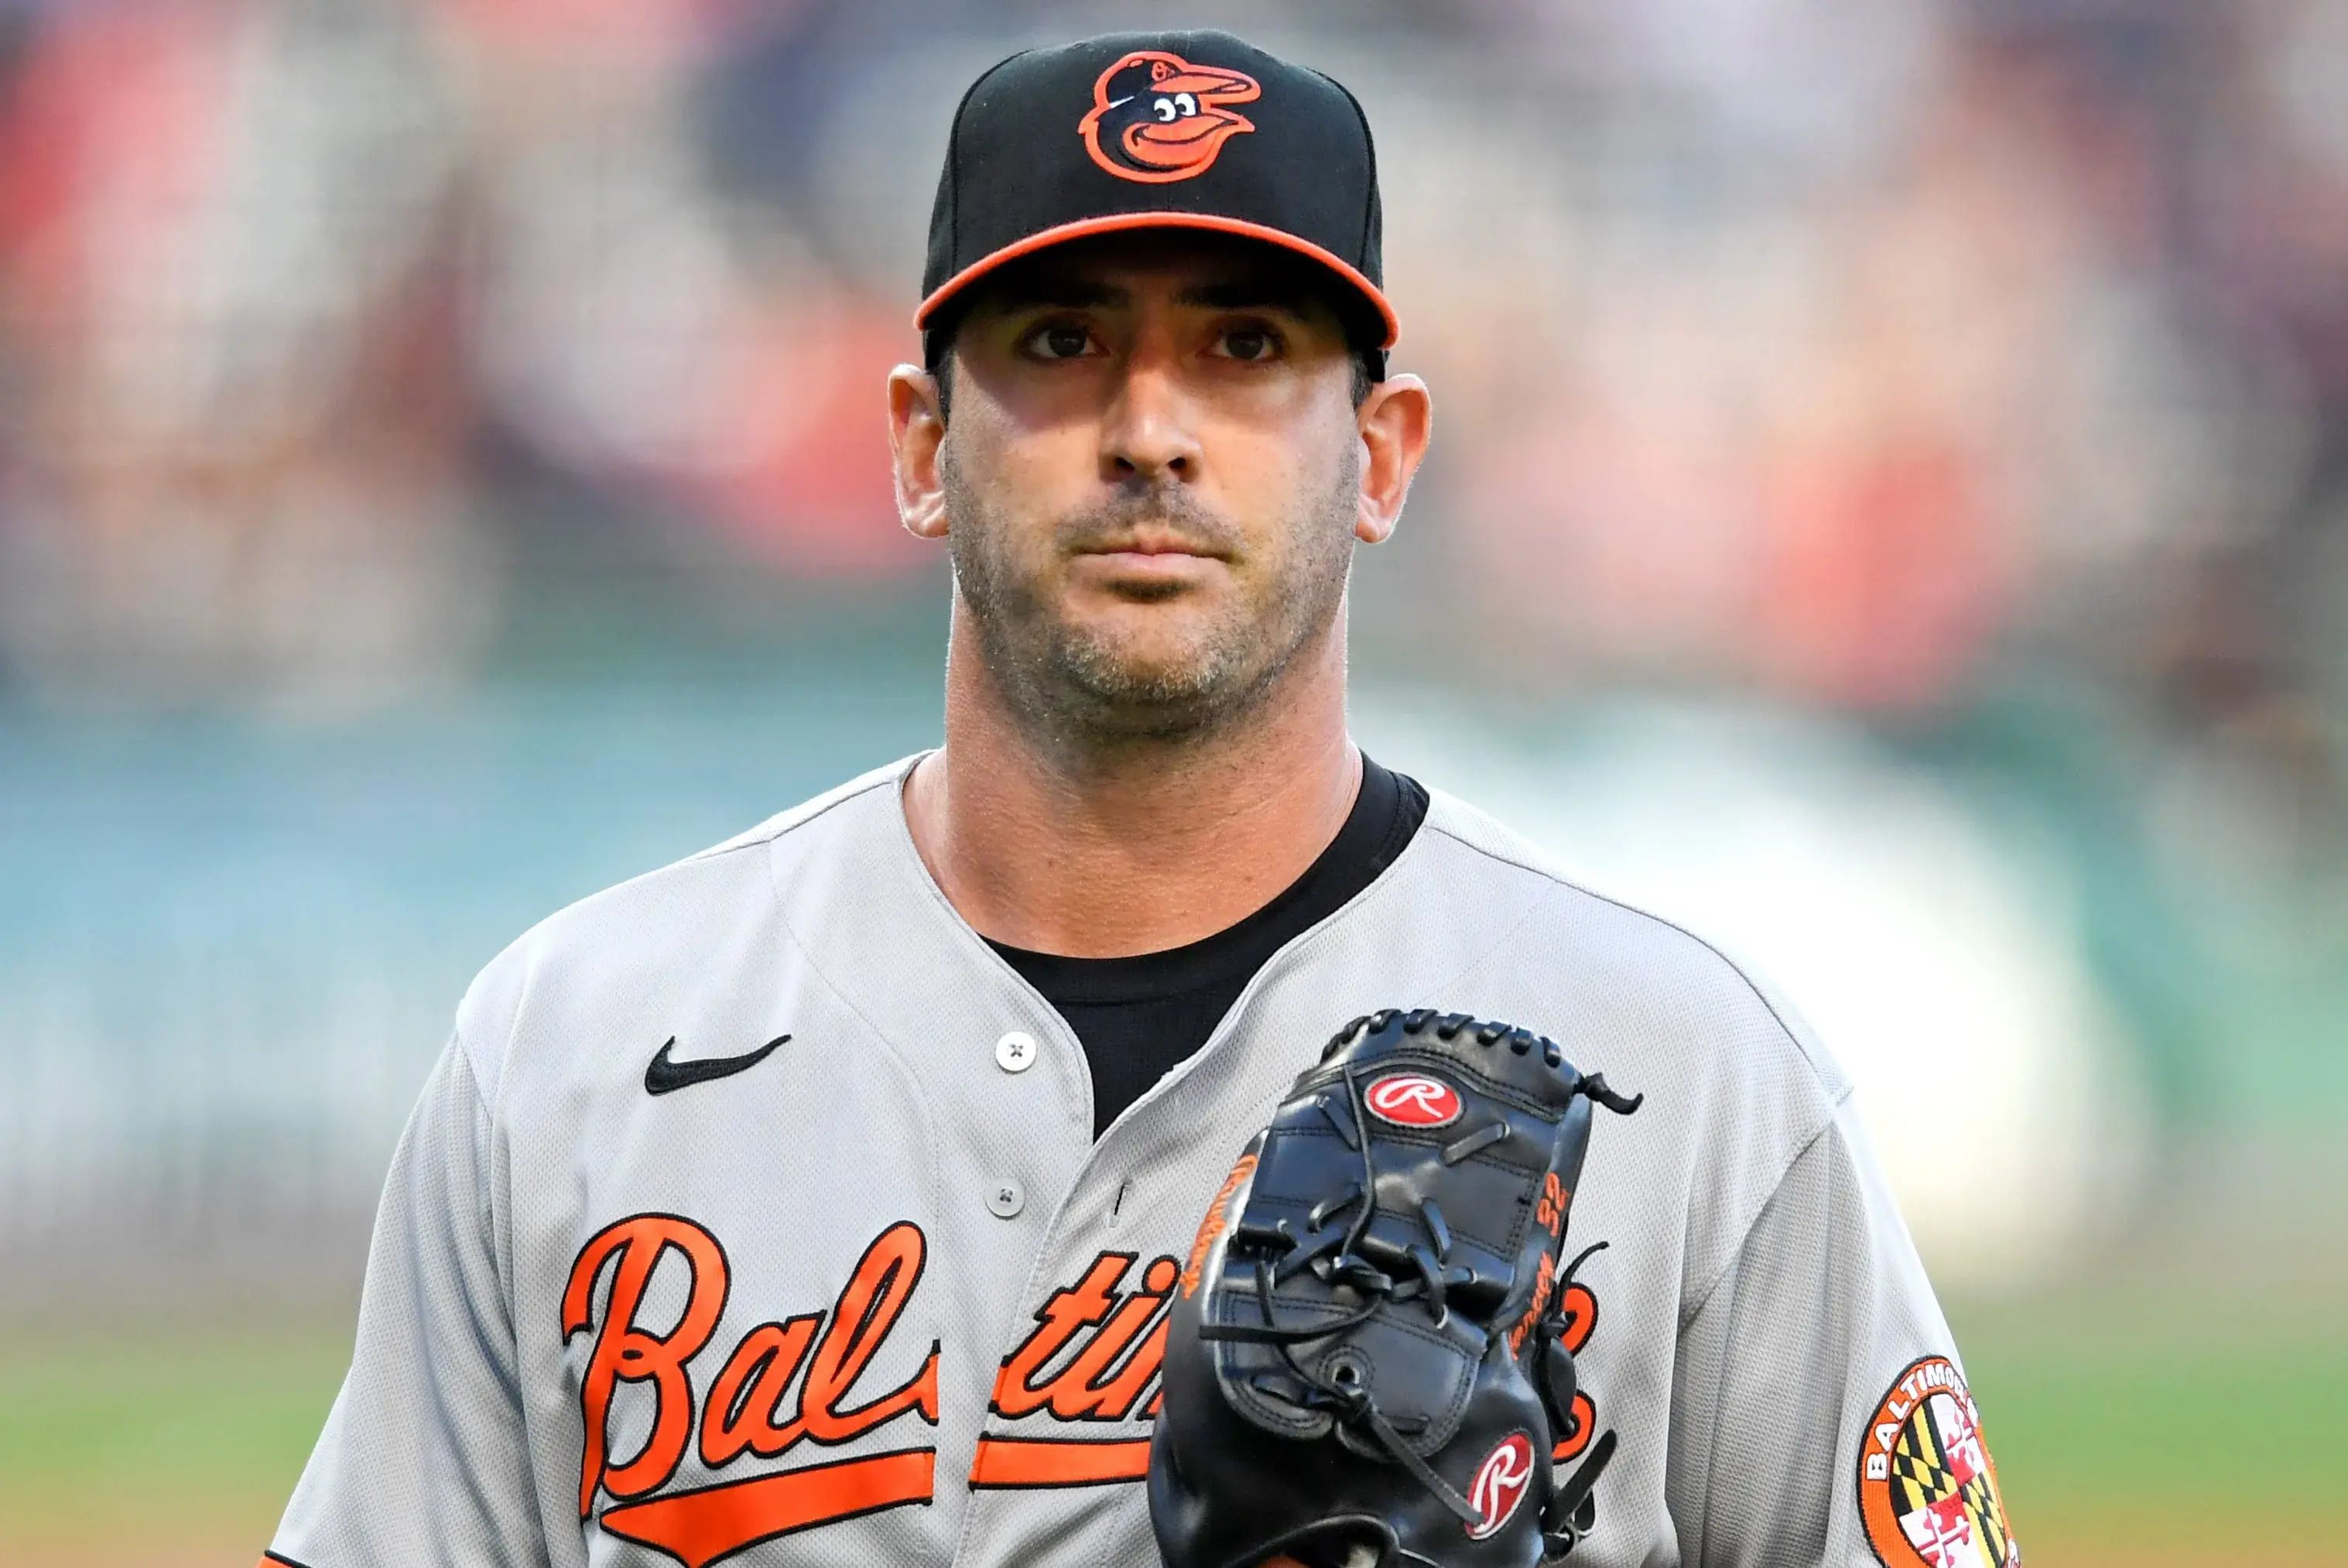 Orioles pitcher Harvey suspended for 60 games